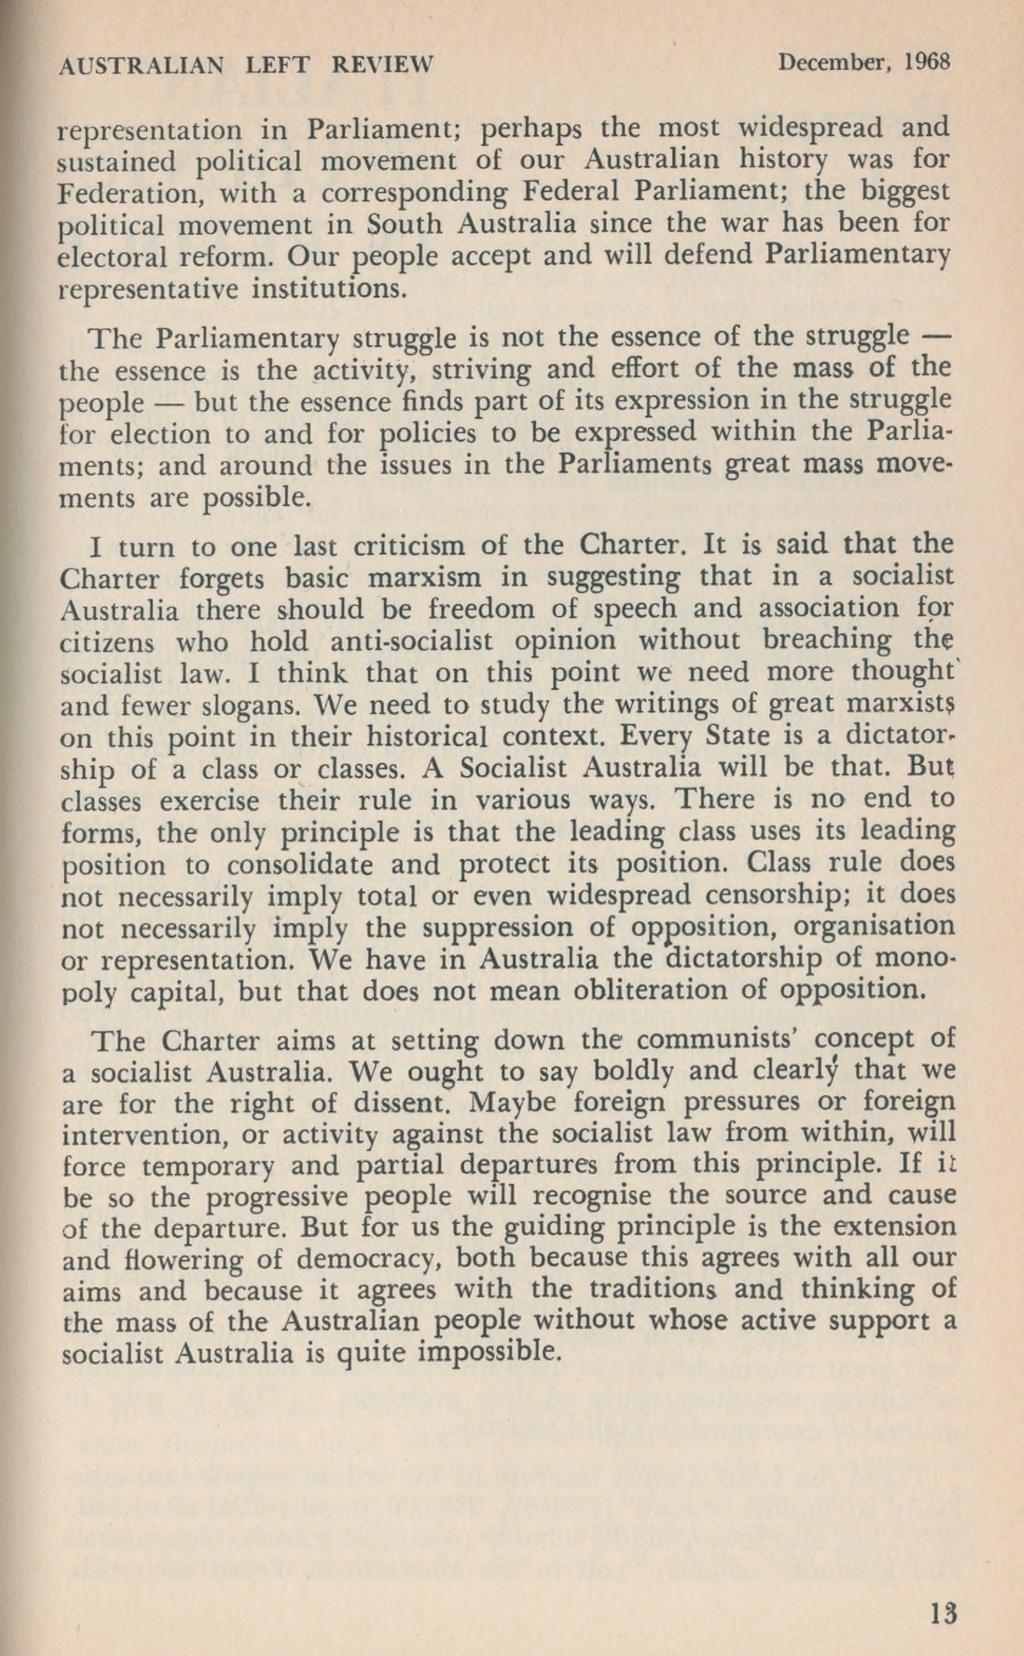 AUSTRALIAN LEFT REVIEW December, 1968 representation in Parliam ent; perhaps the most widespread and sustained political movement of our Australian history was for Federation, with a corresponding